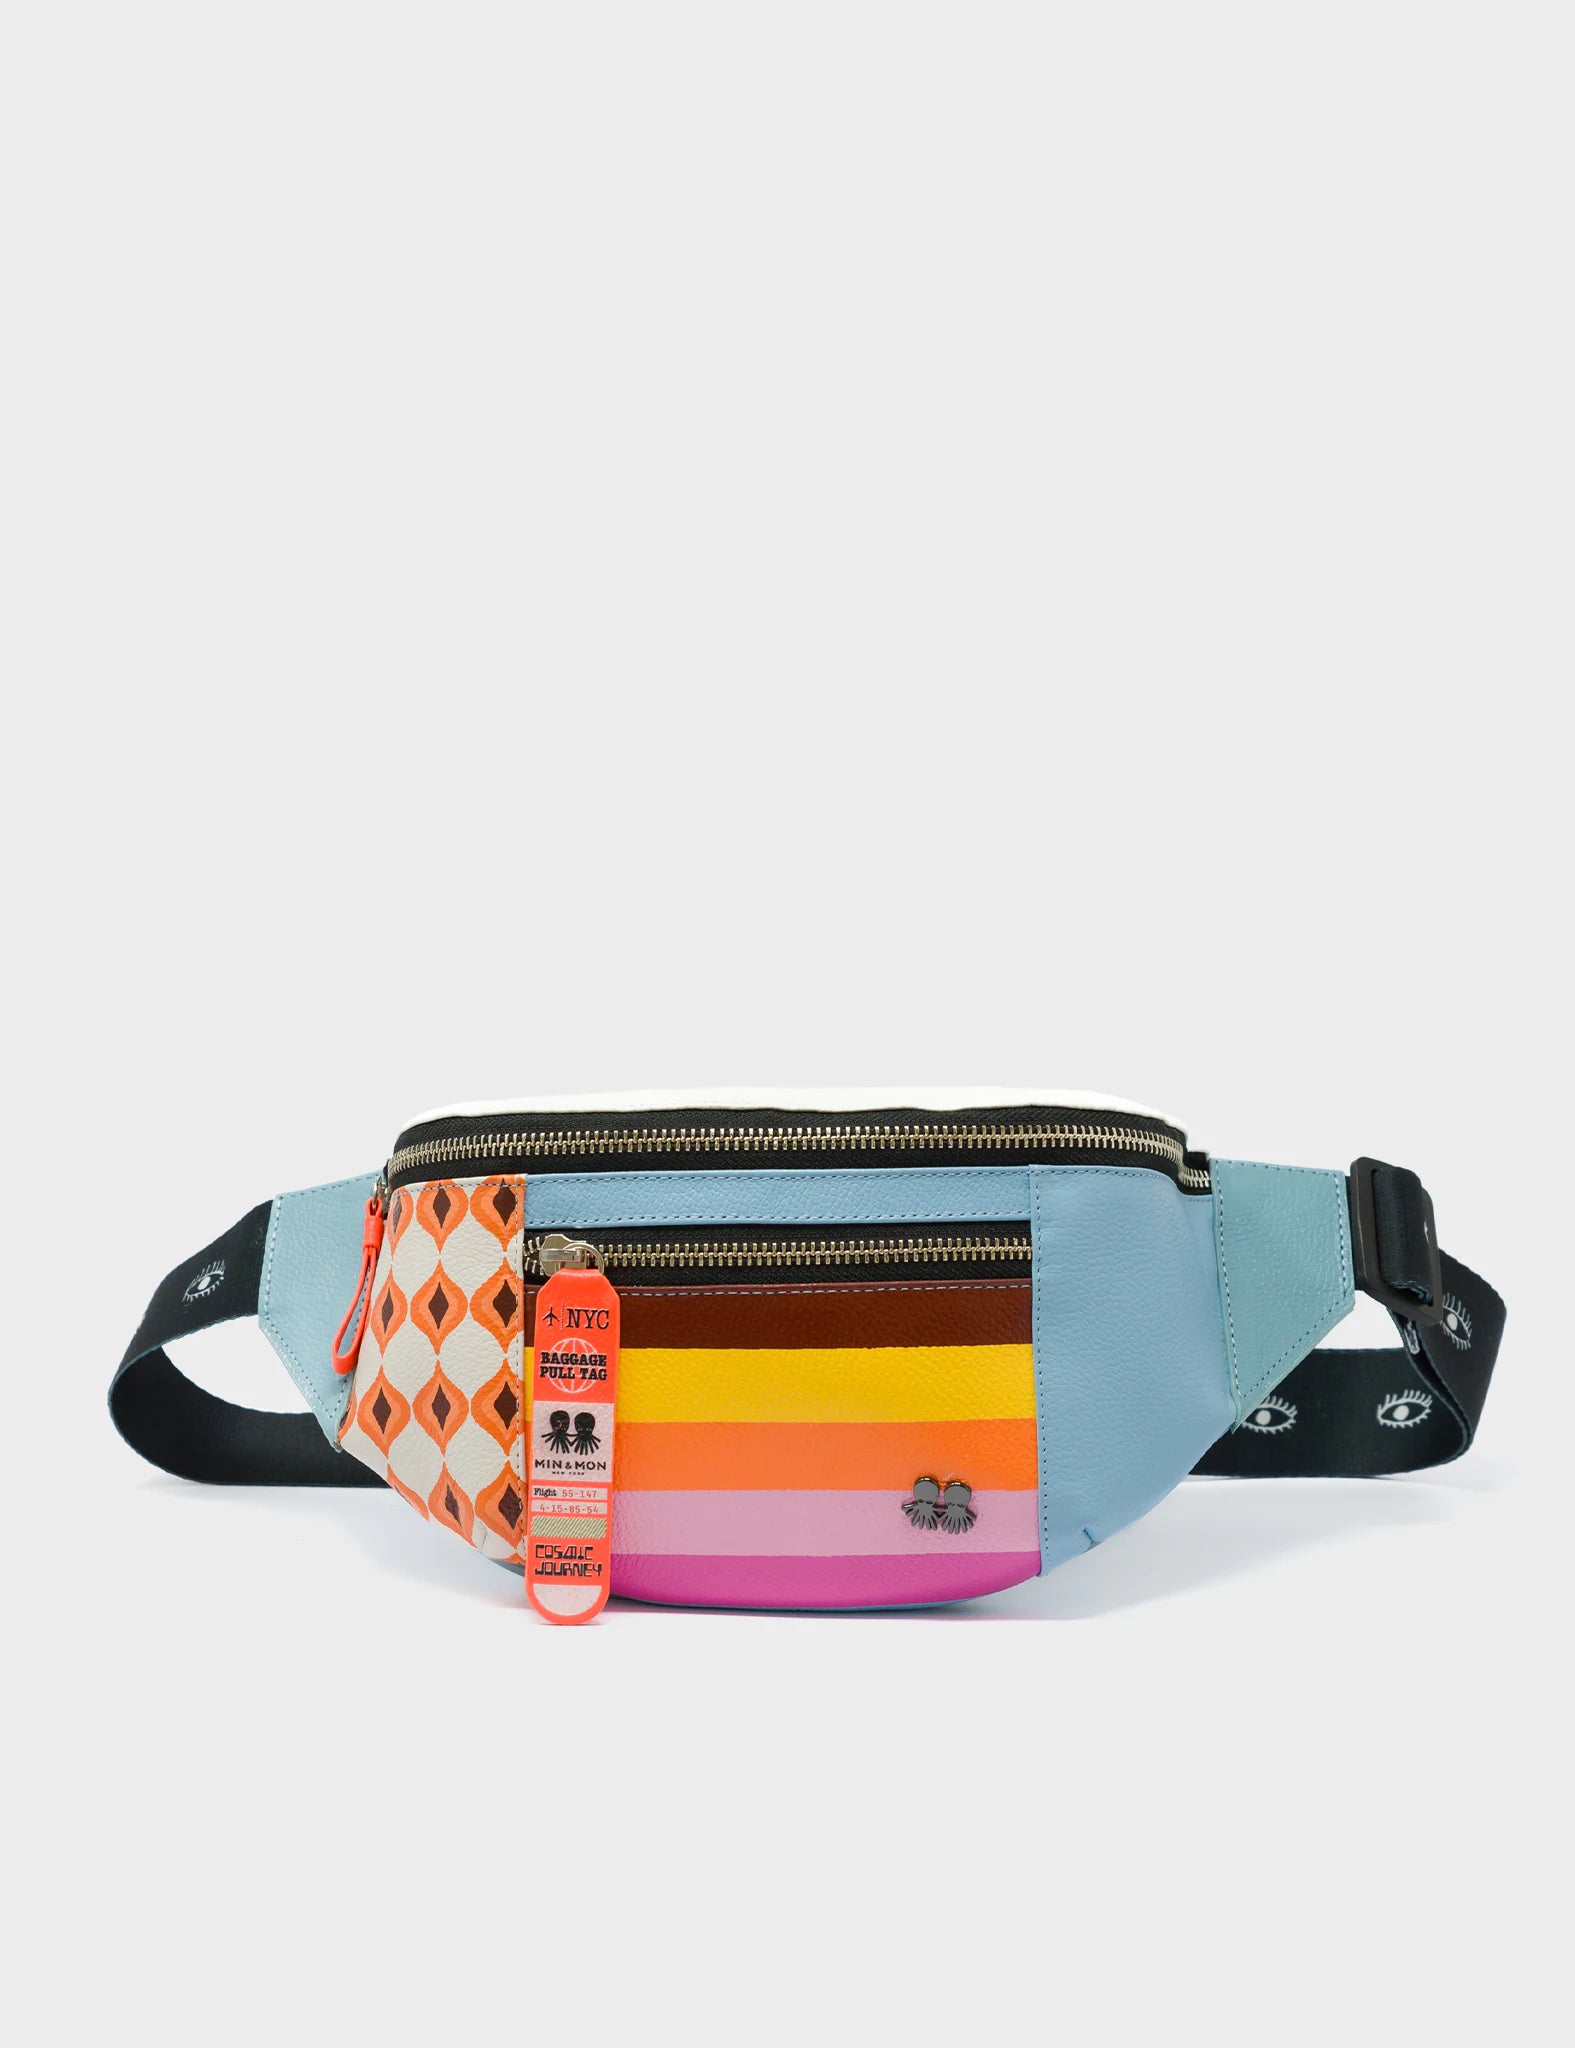 Bag Fanny Pack Cream And Blue Leather - Eyes Pattern Debossed - Front 